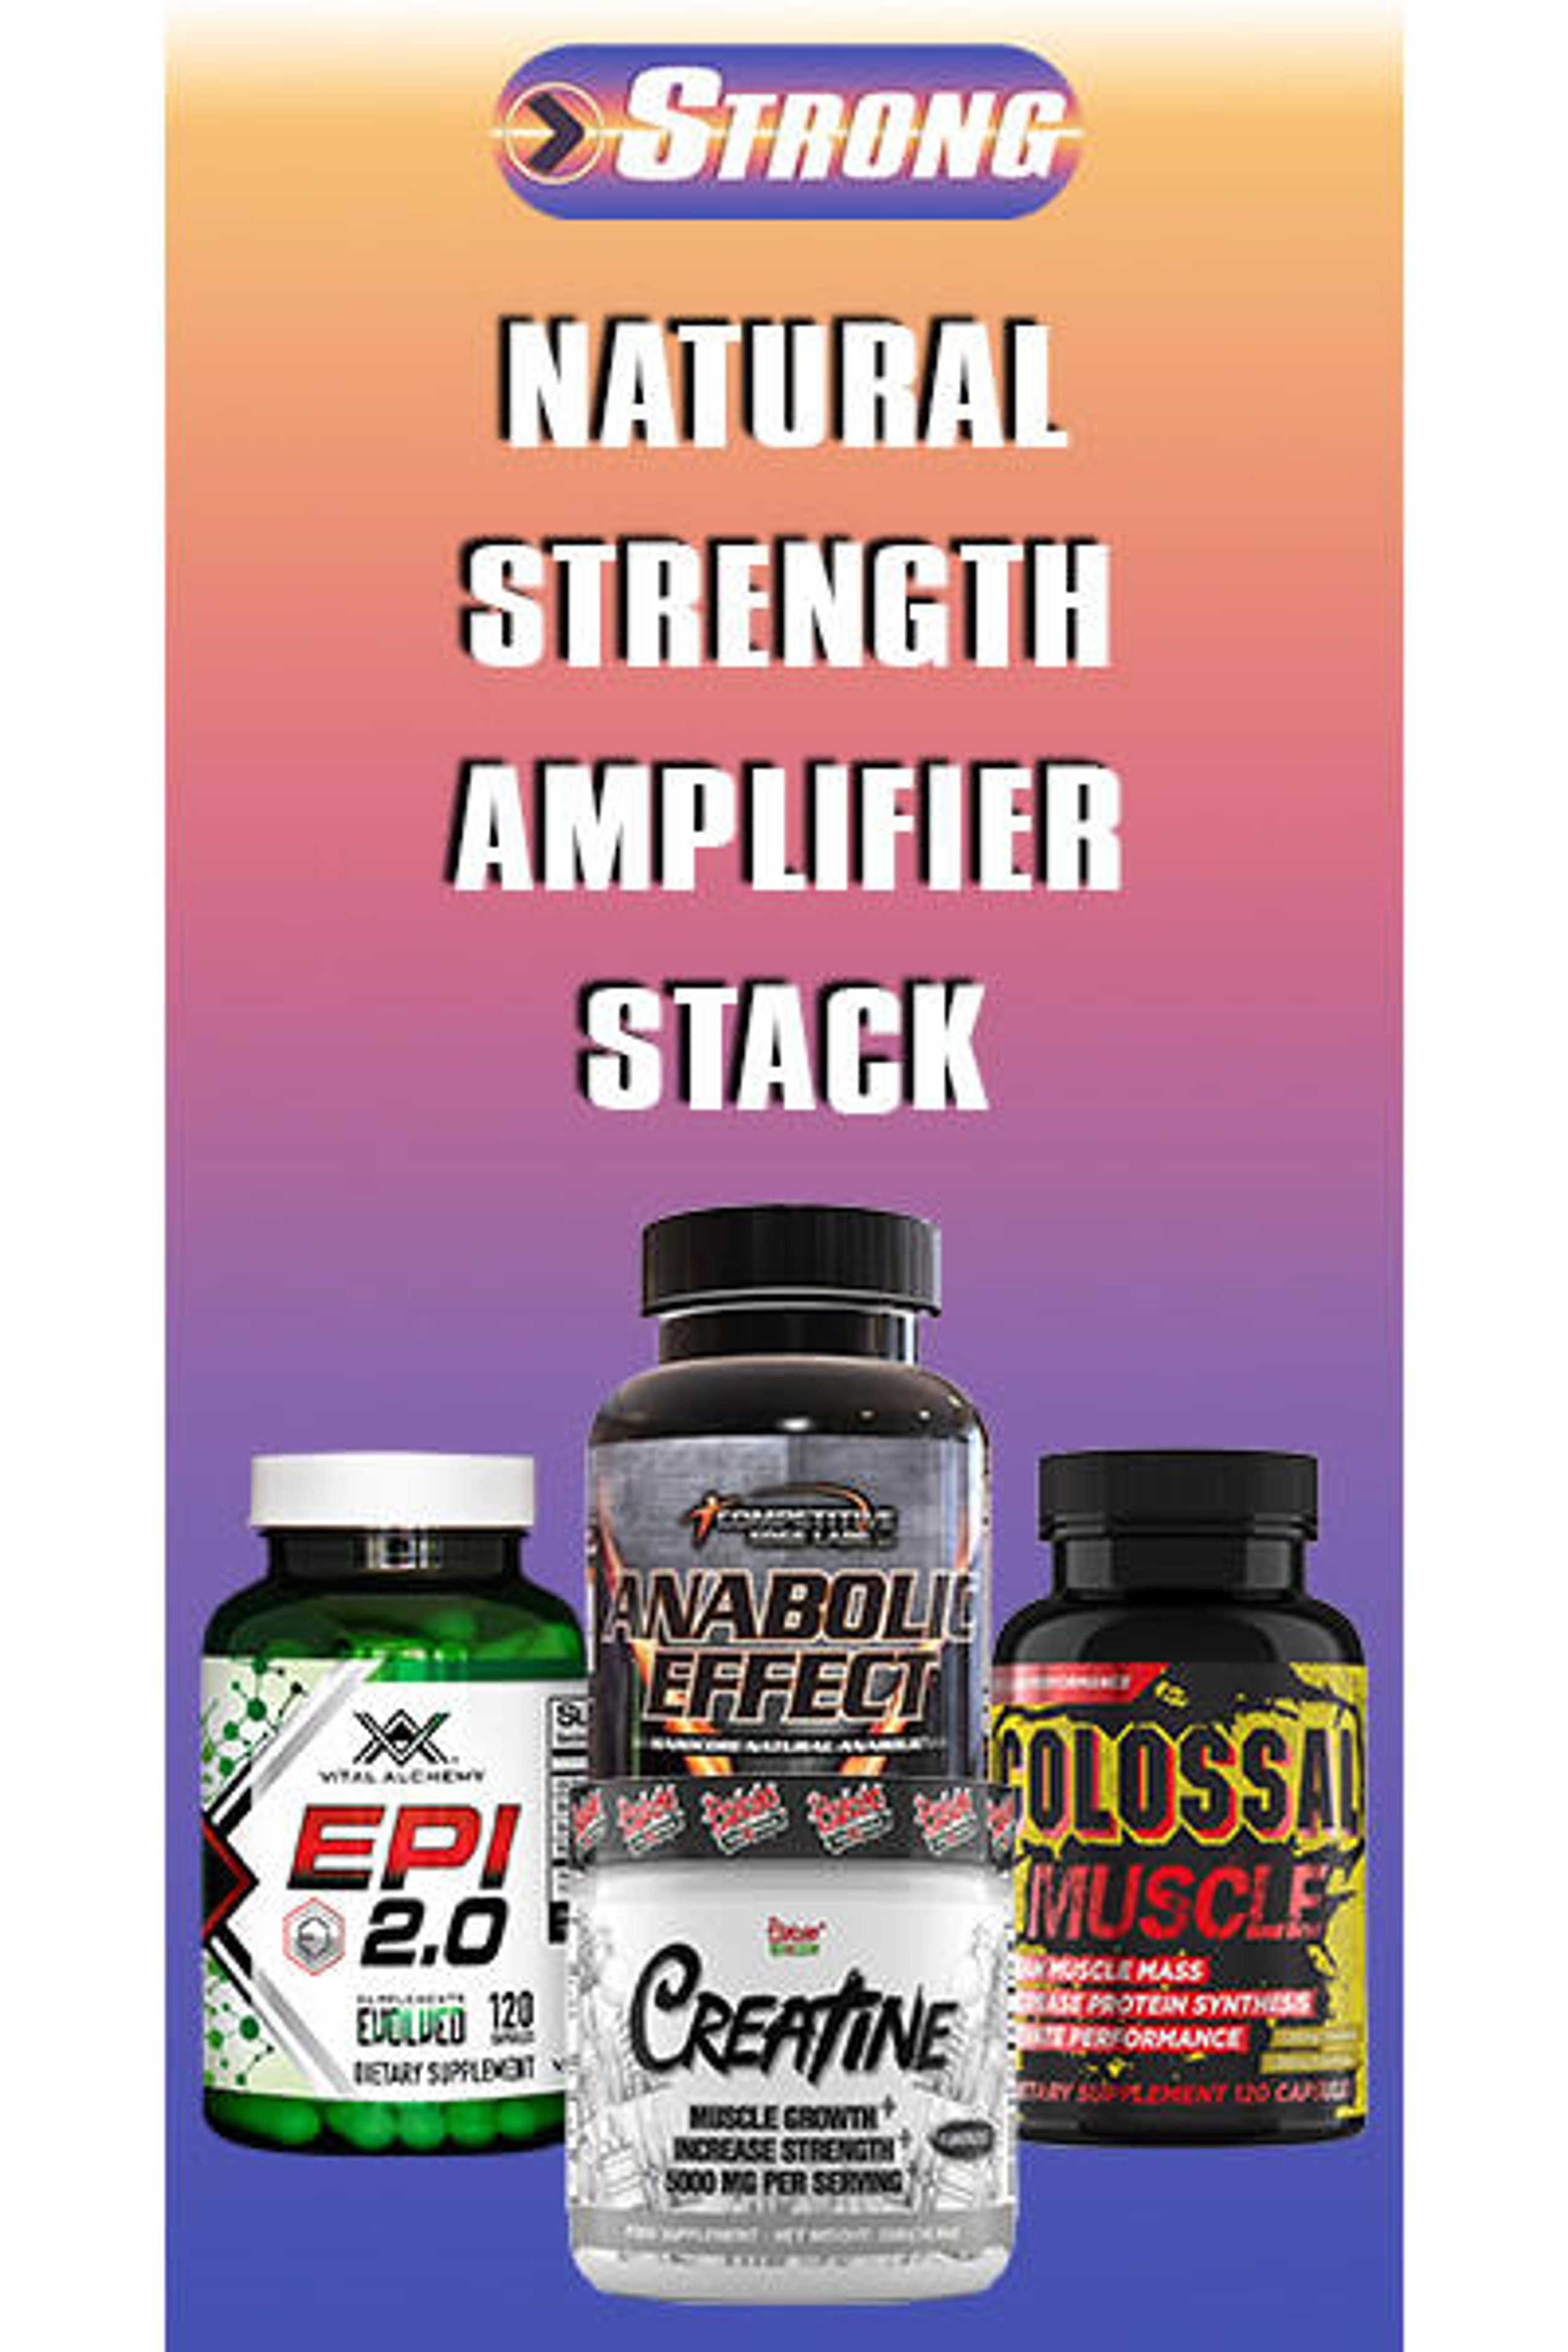 Natural Strength Amplifier Stack